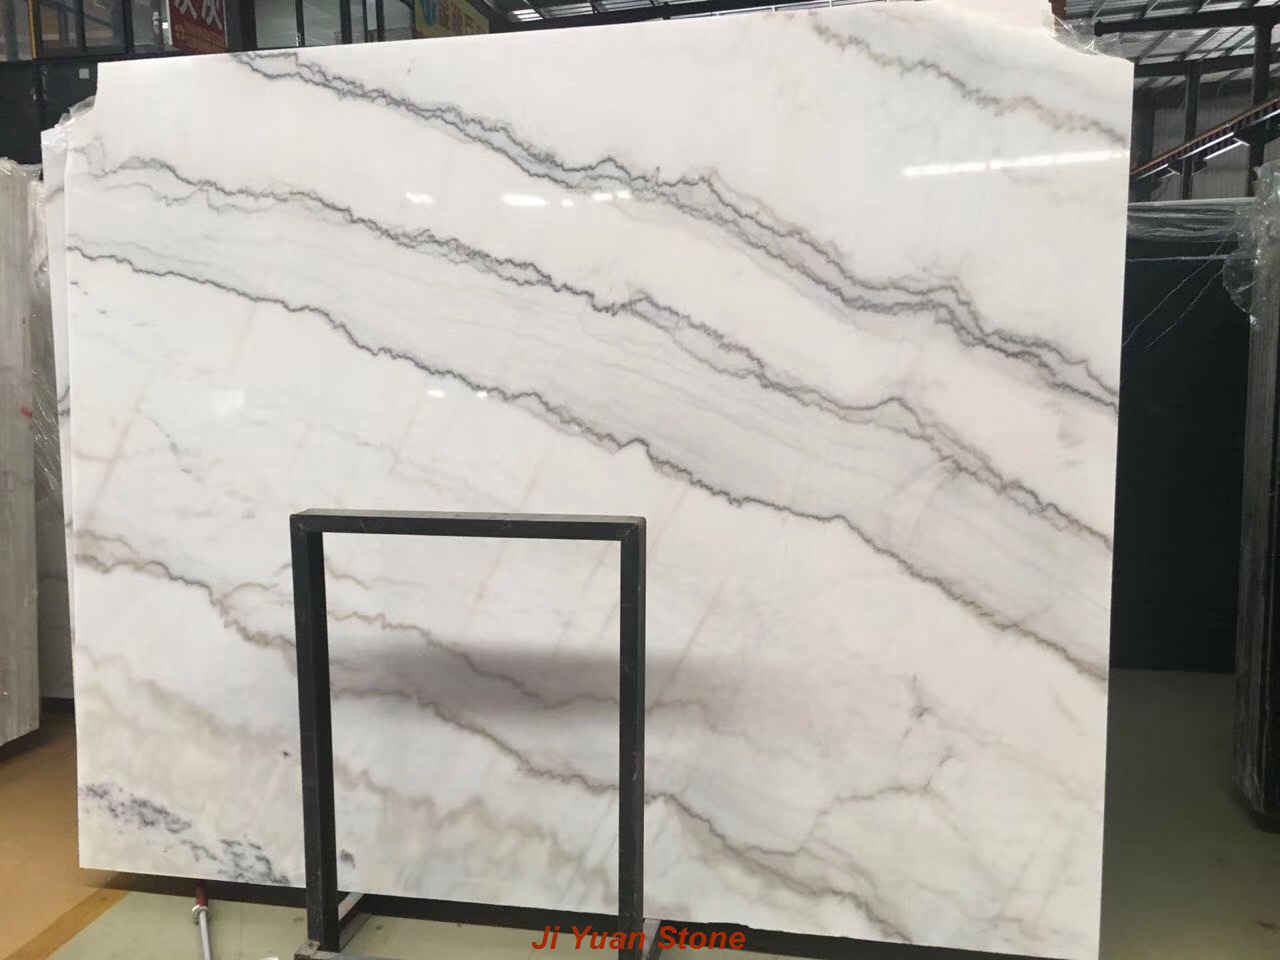 How to detect the color difference of white marble slab? Marble and tiles color difference processing method